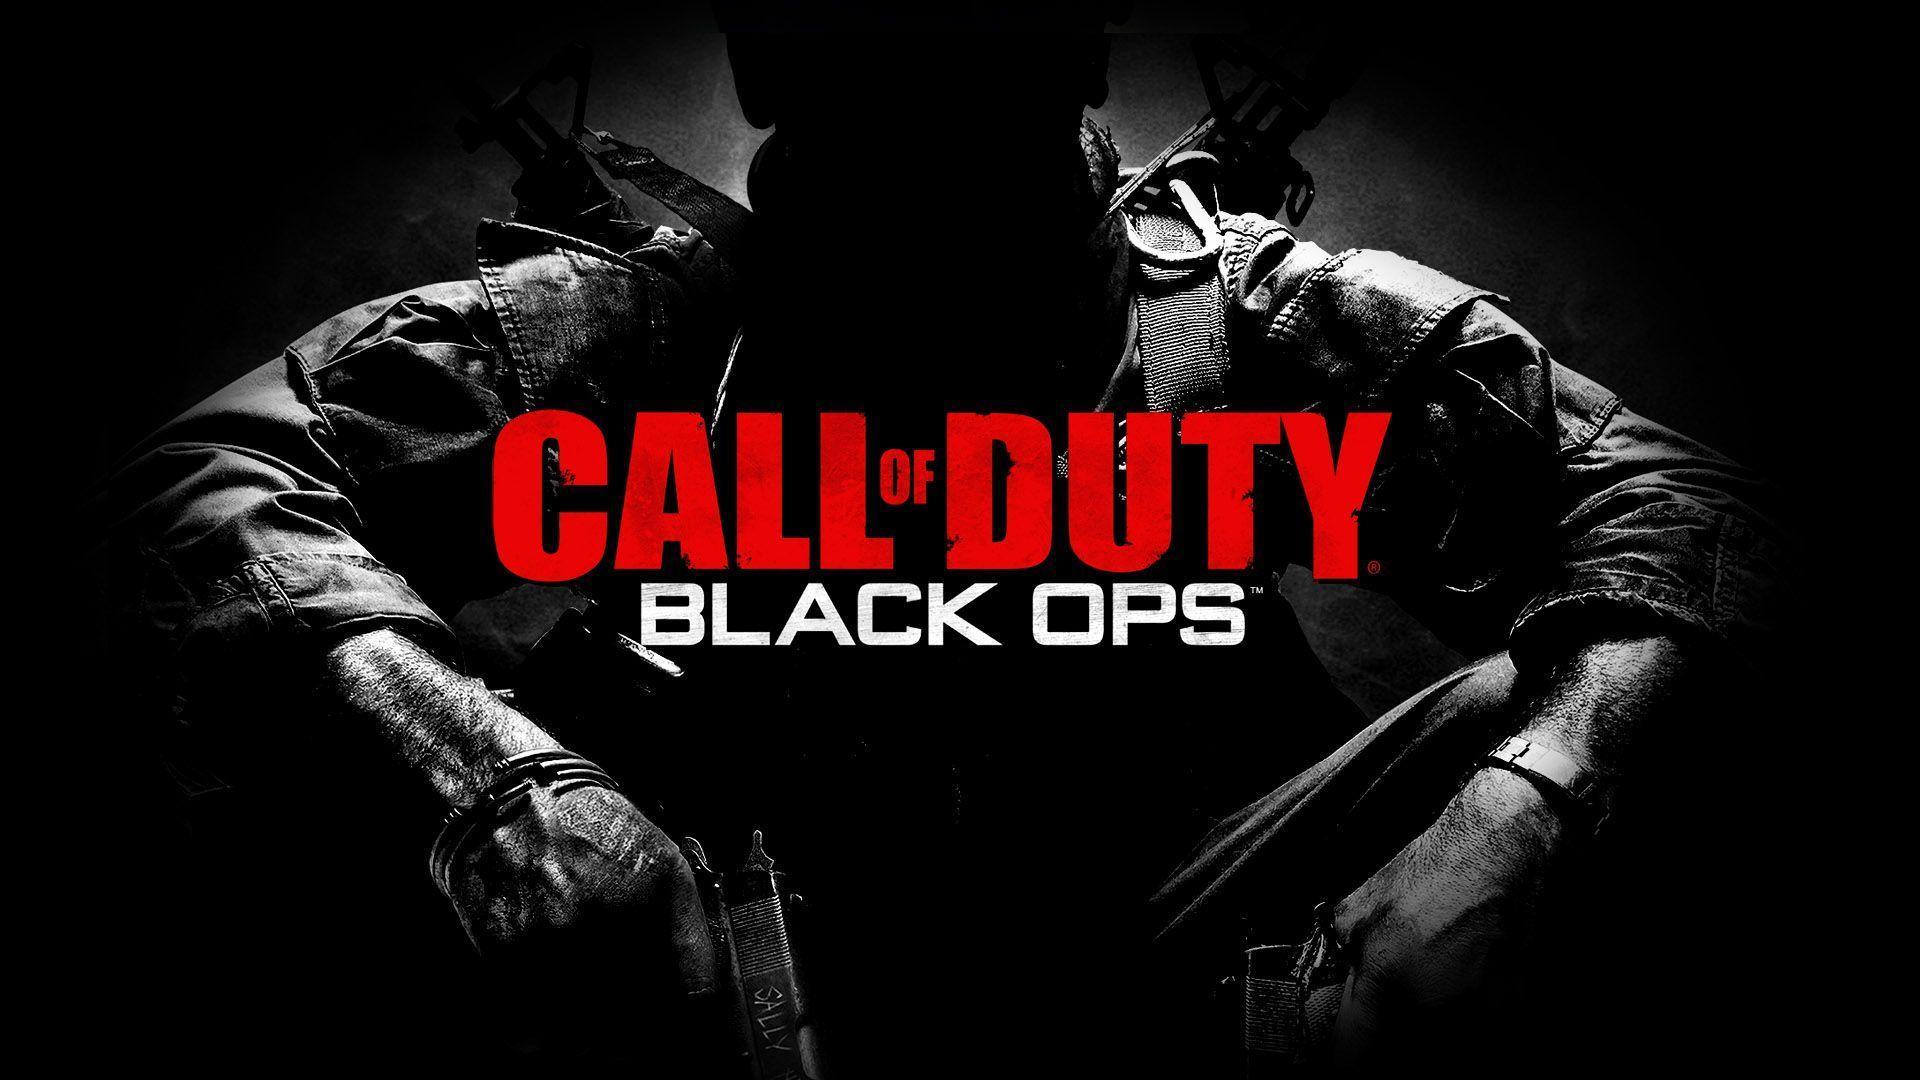 Call Of Duty: Black Ops Wallpapers HD - Wallpaper Cave